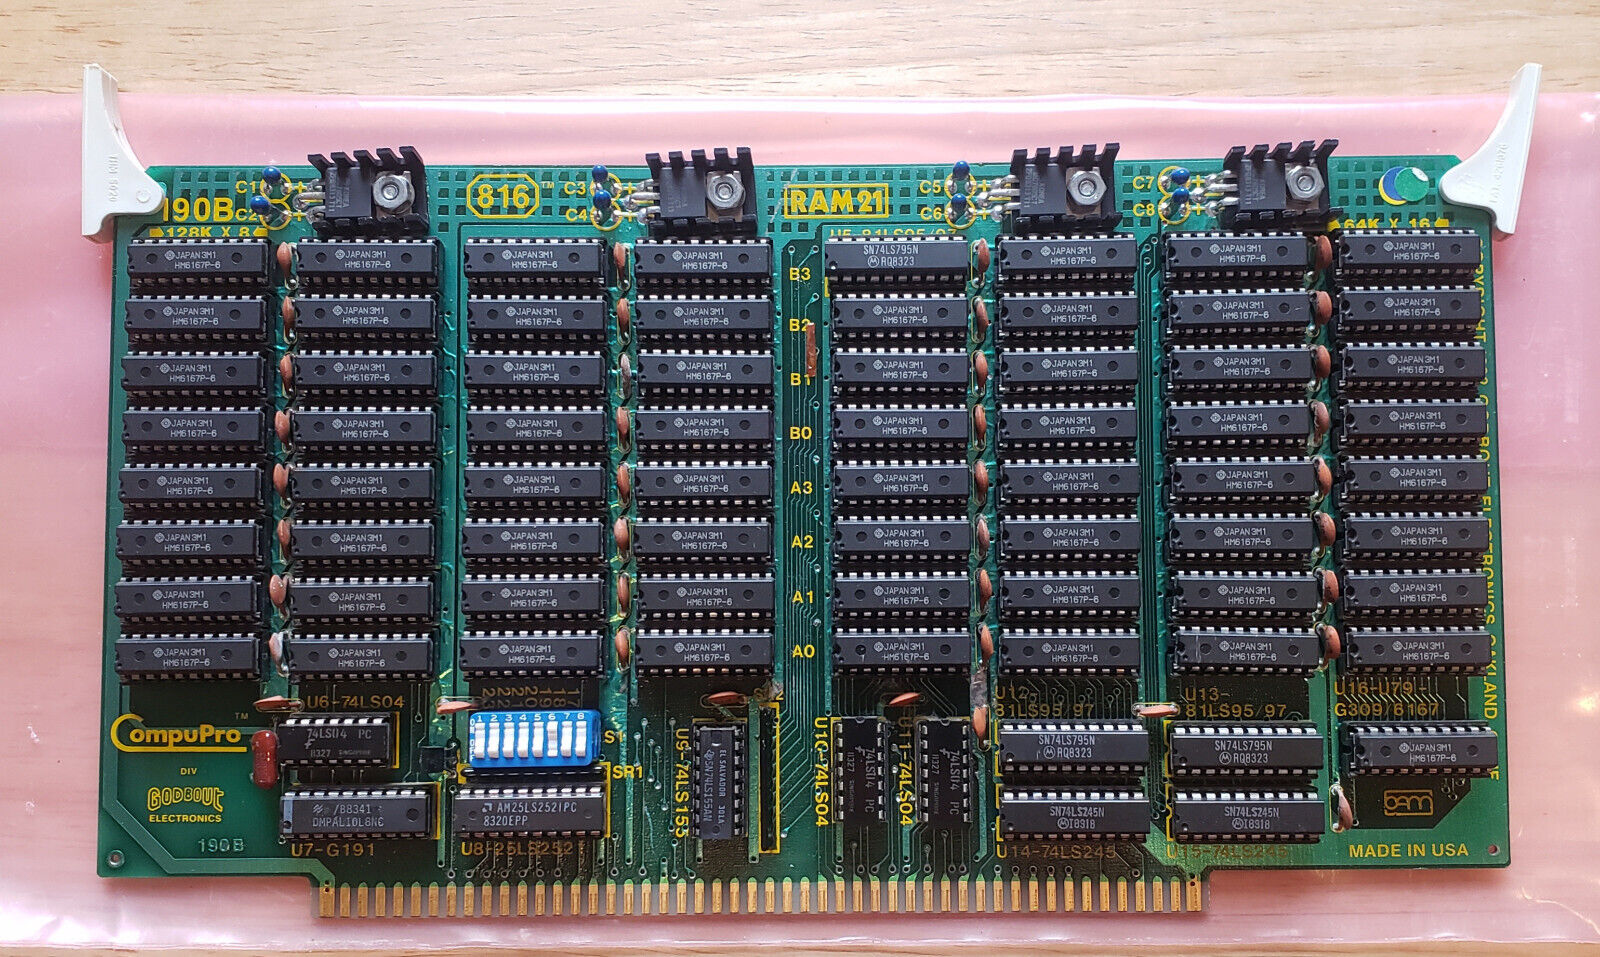 S-100 Compupro RAM 21 Memory Board. Pulled from a working system.